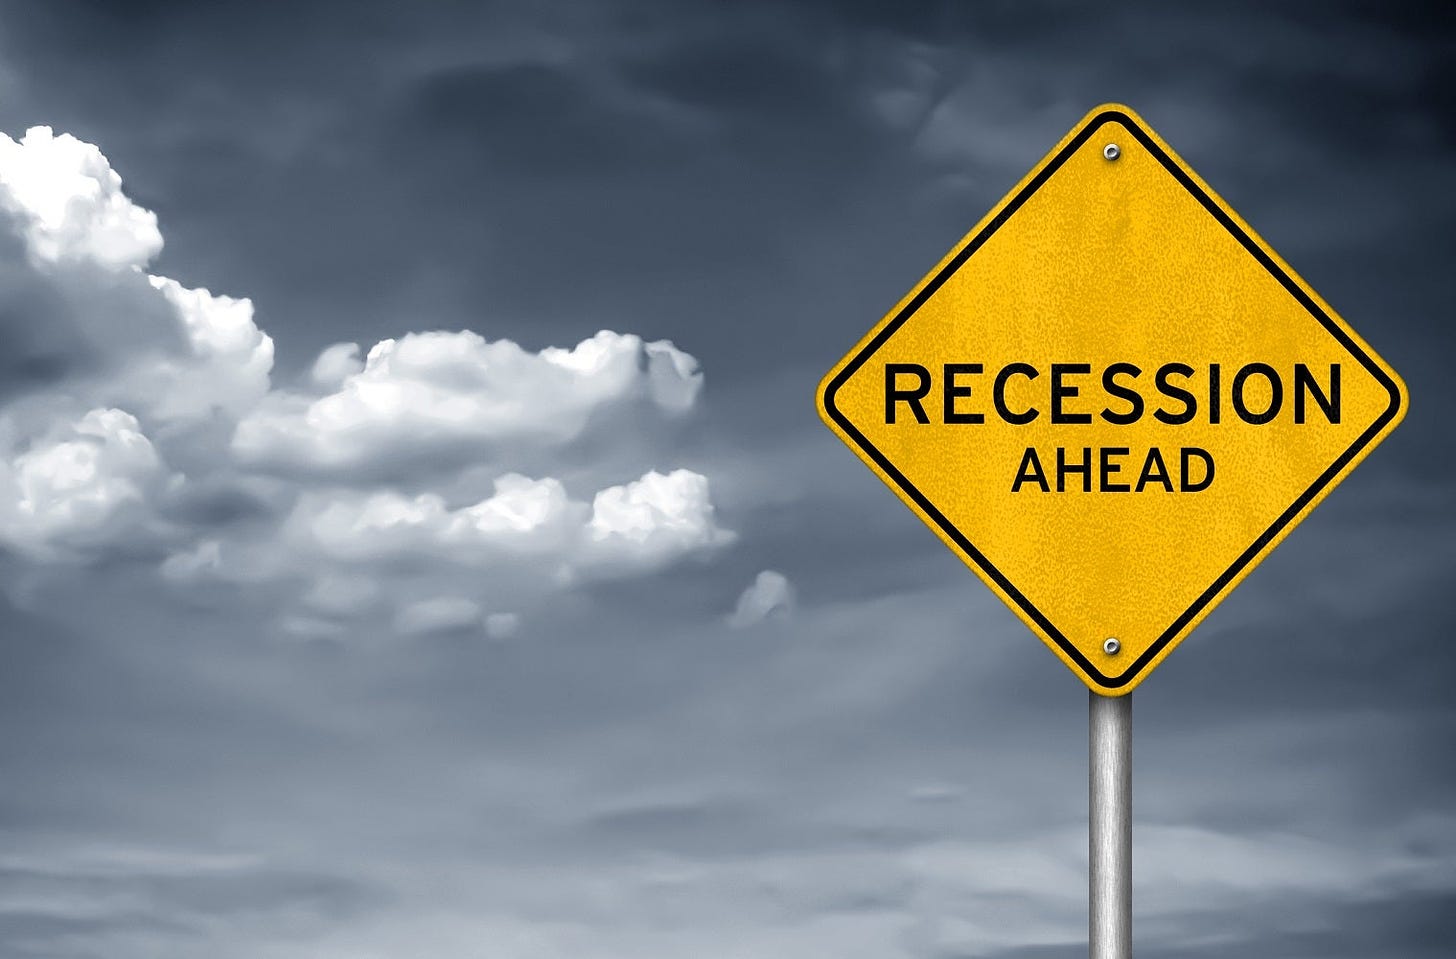 Here Are My Top 3 Recession-Resistant Stocks | The Motley Fool